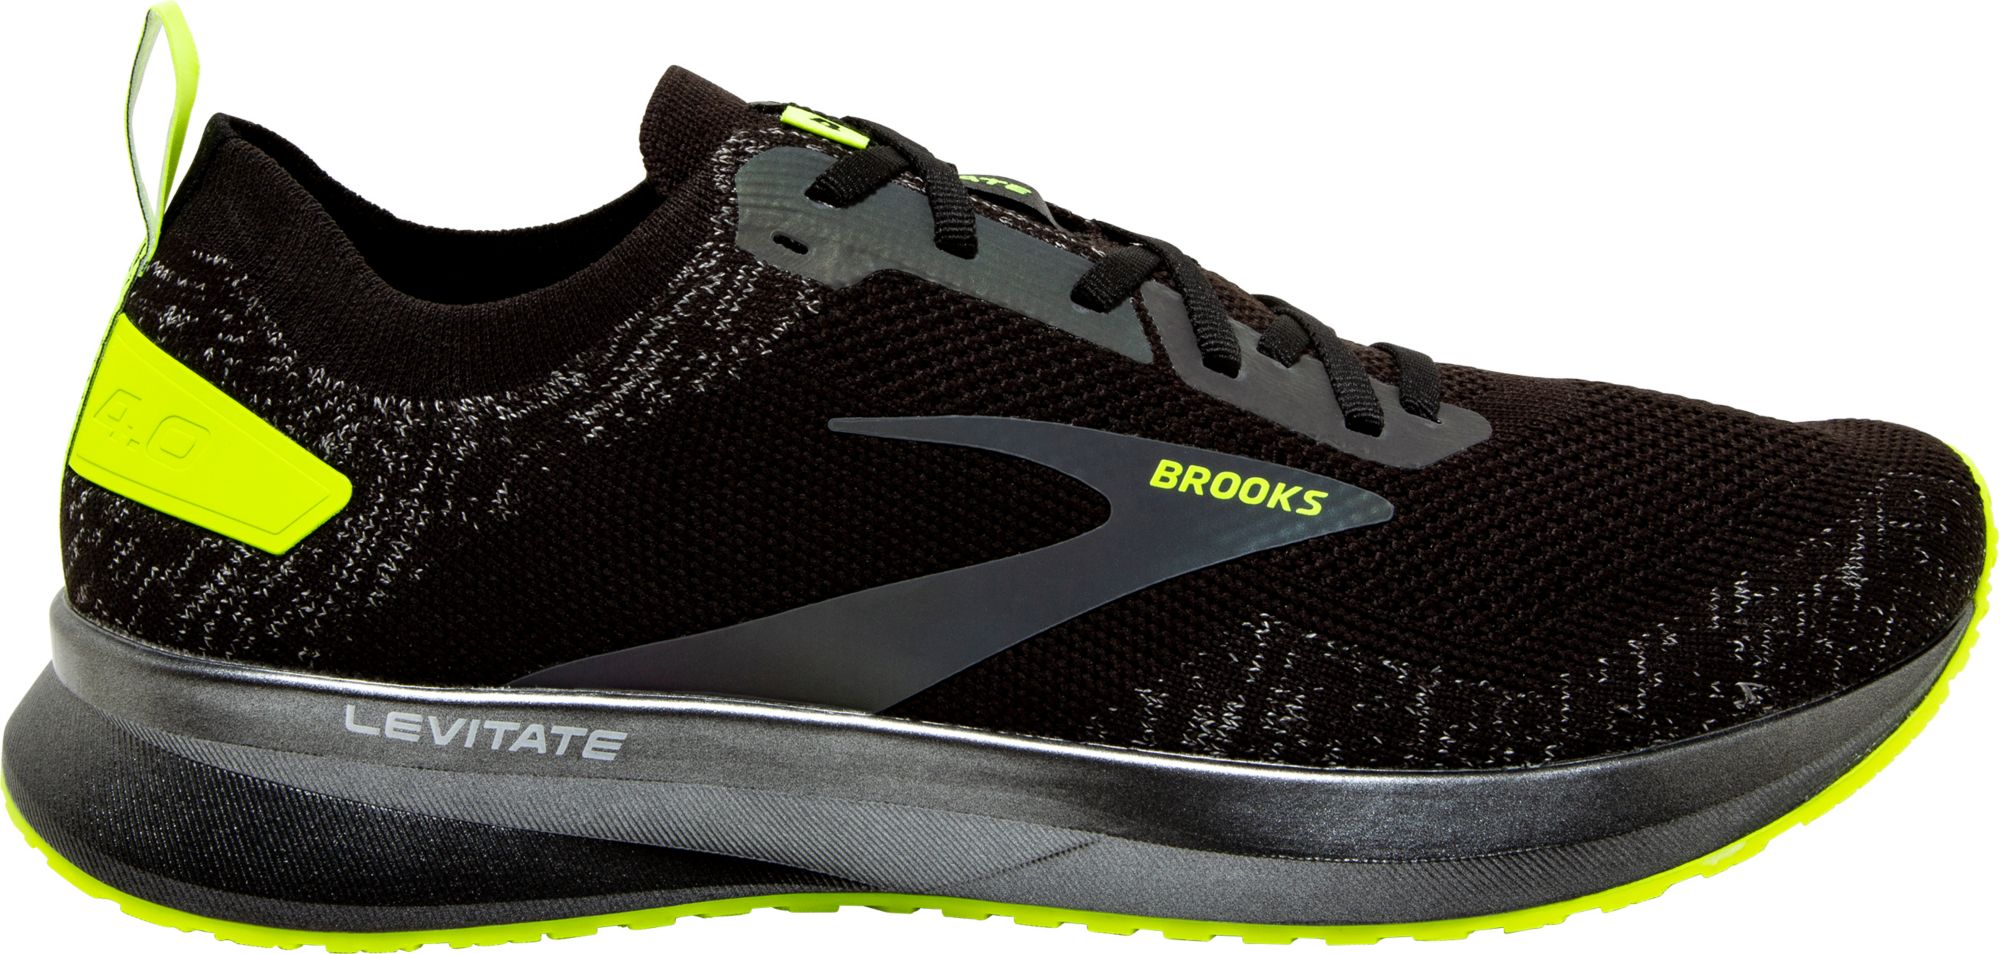 dick's sporting goods brooks shoes